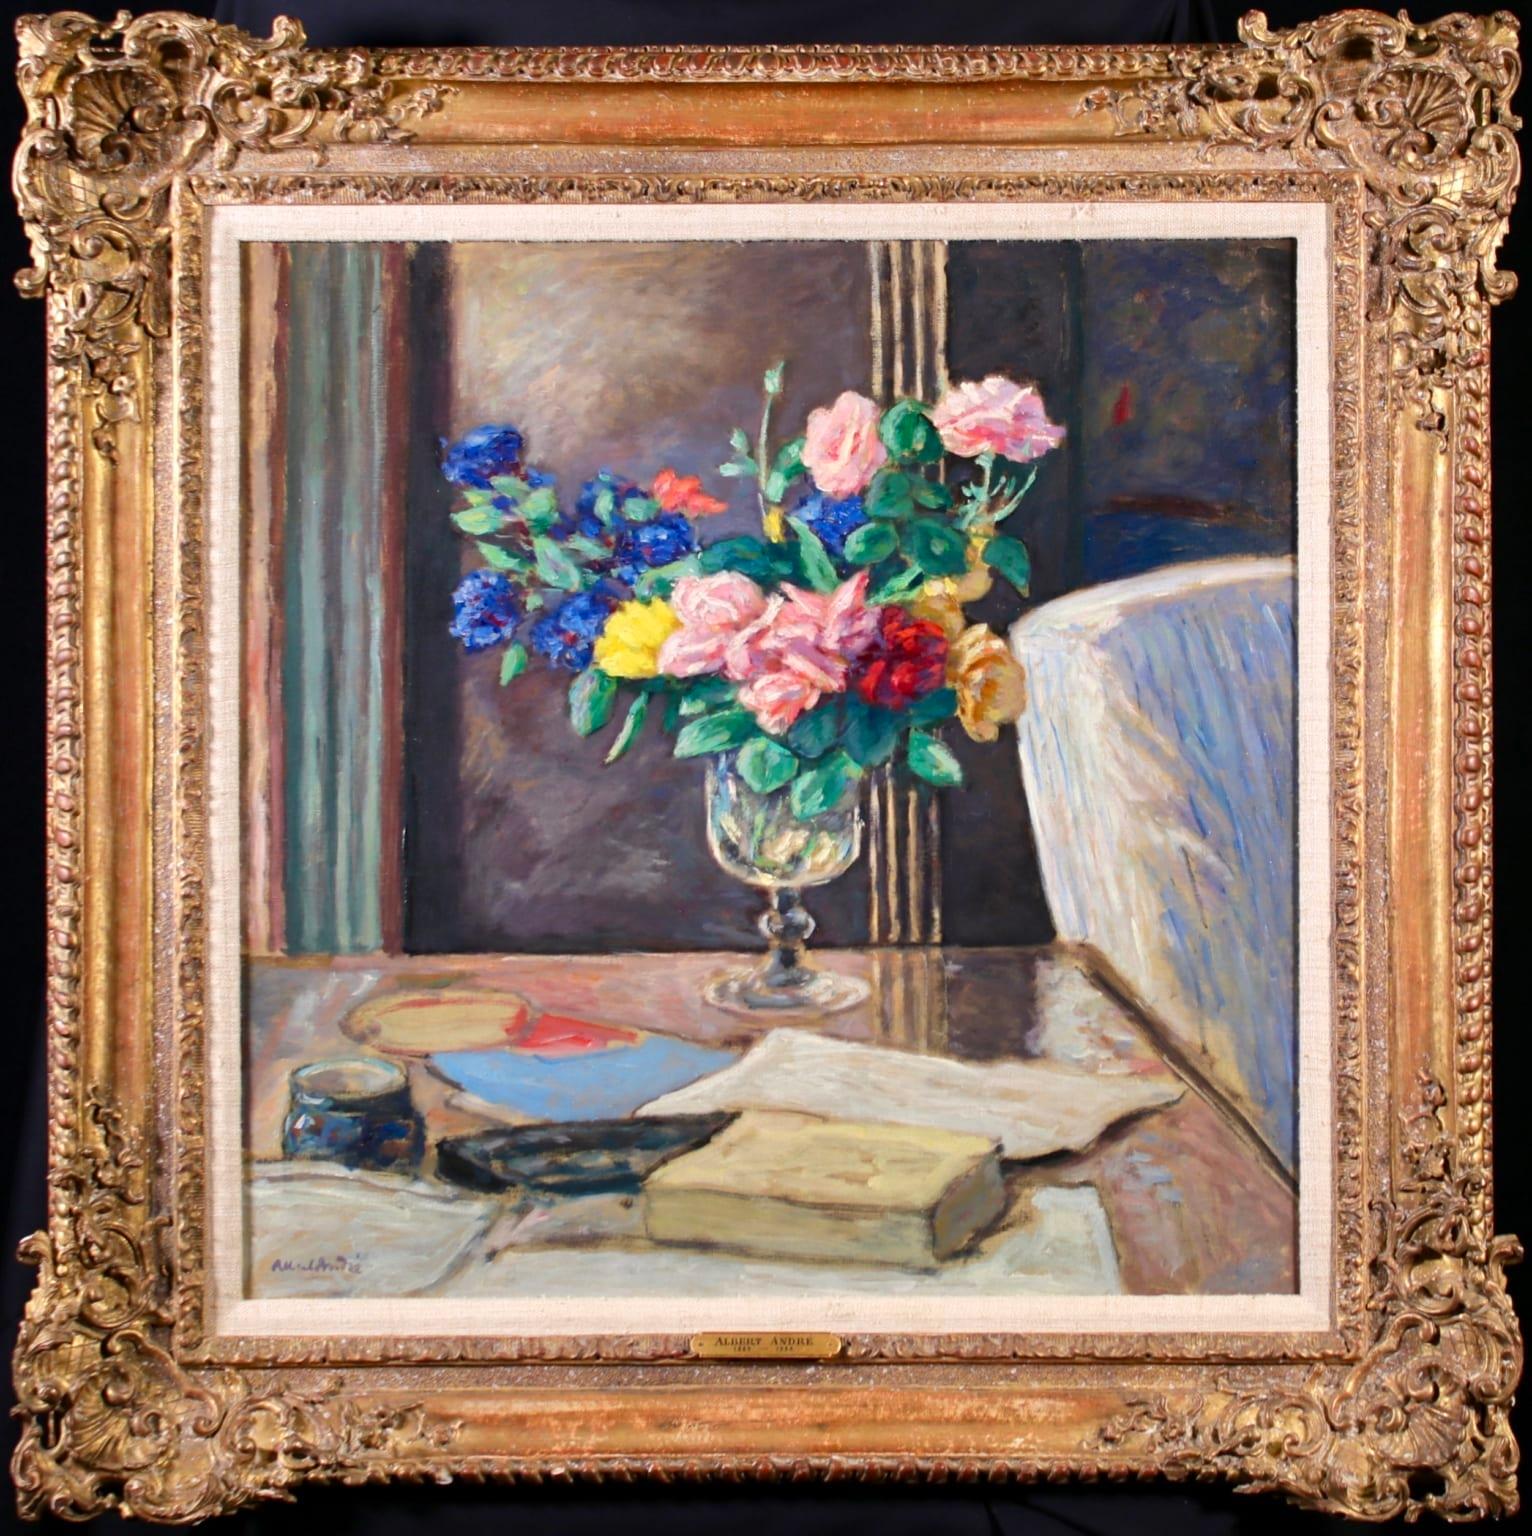 Signed and titled still life oil on canvas circa 1900 by French post impressionist painter Albert André. The work depicts a still life scene in an interior. A vase of pink, yellow, red and blue roses is set upon a table next to books, paperwork and